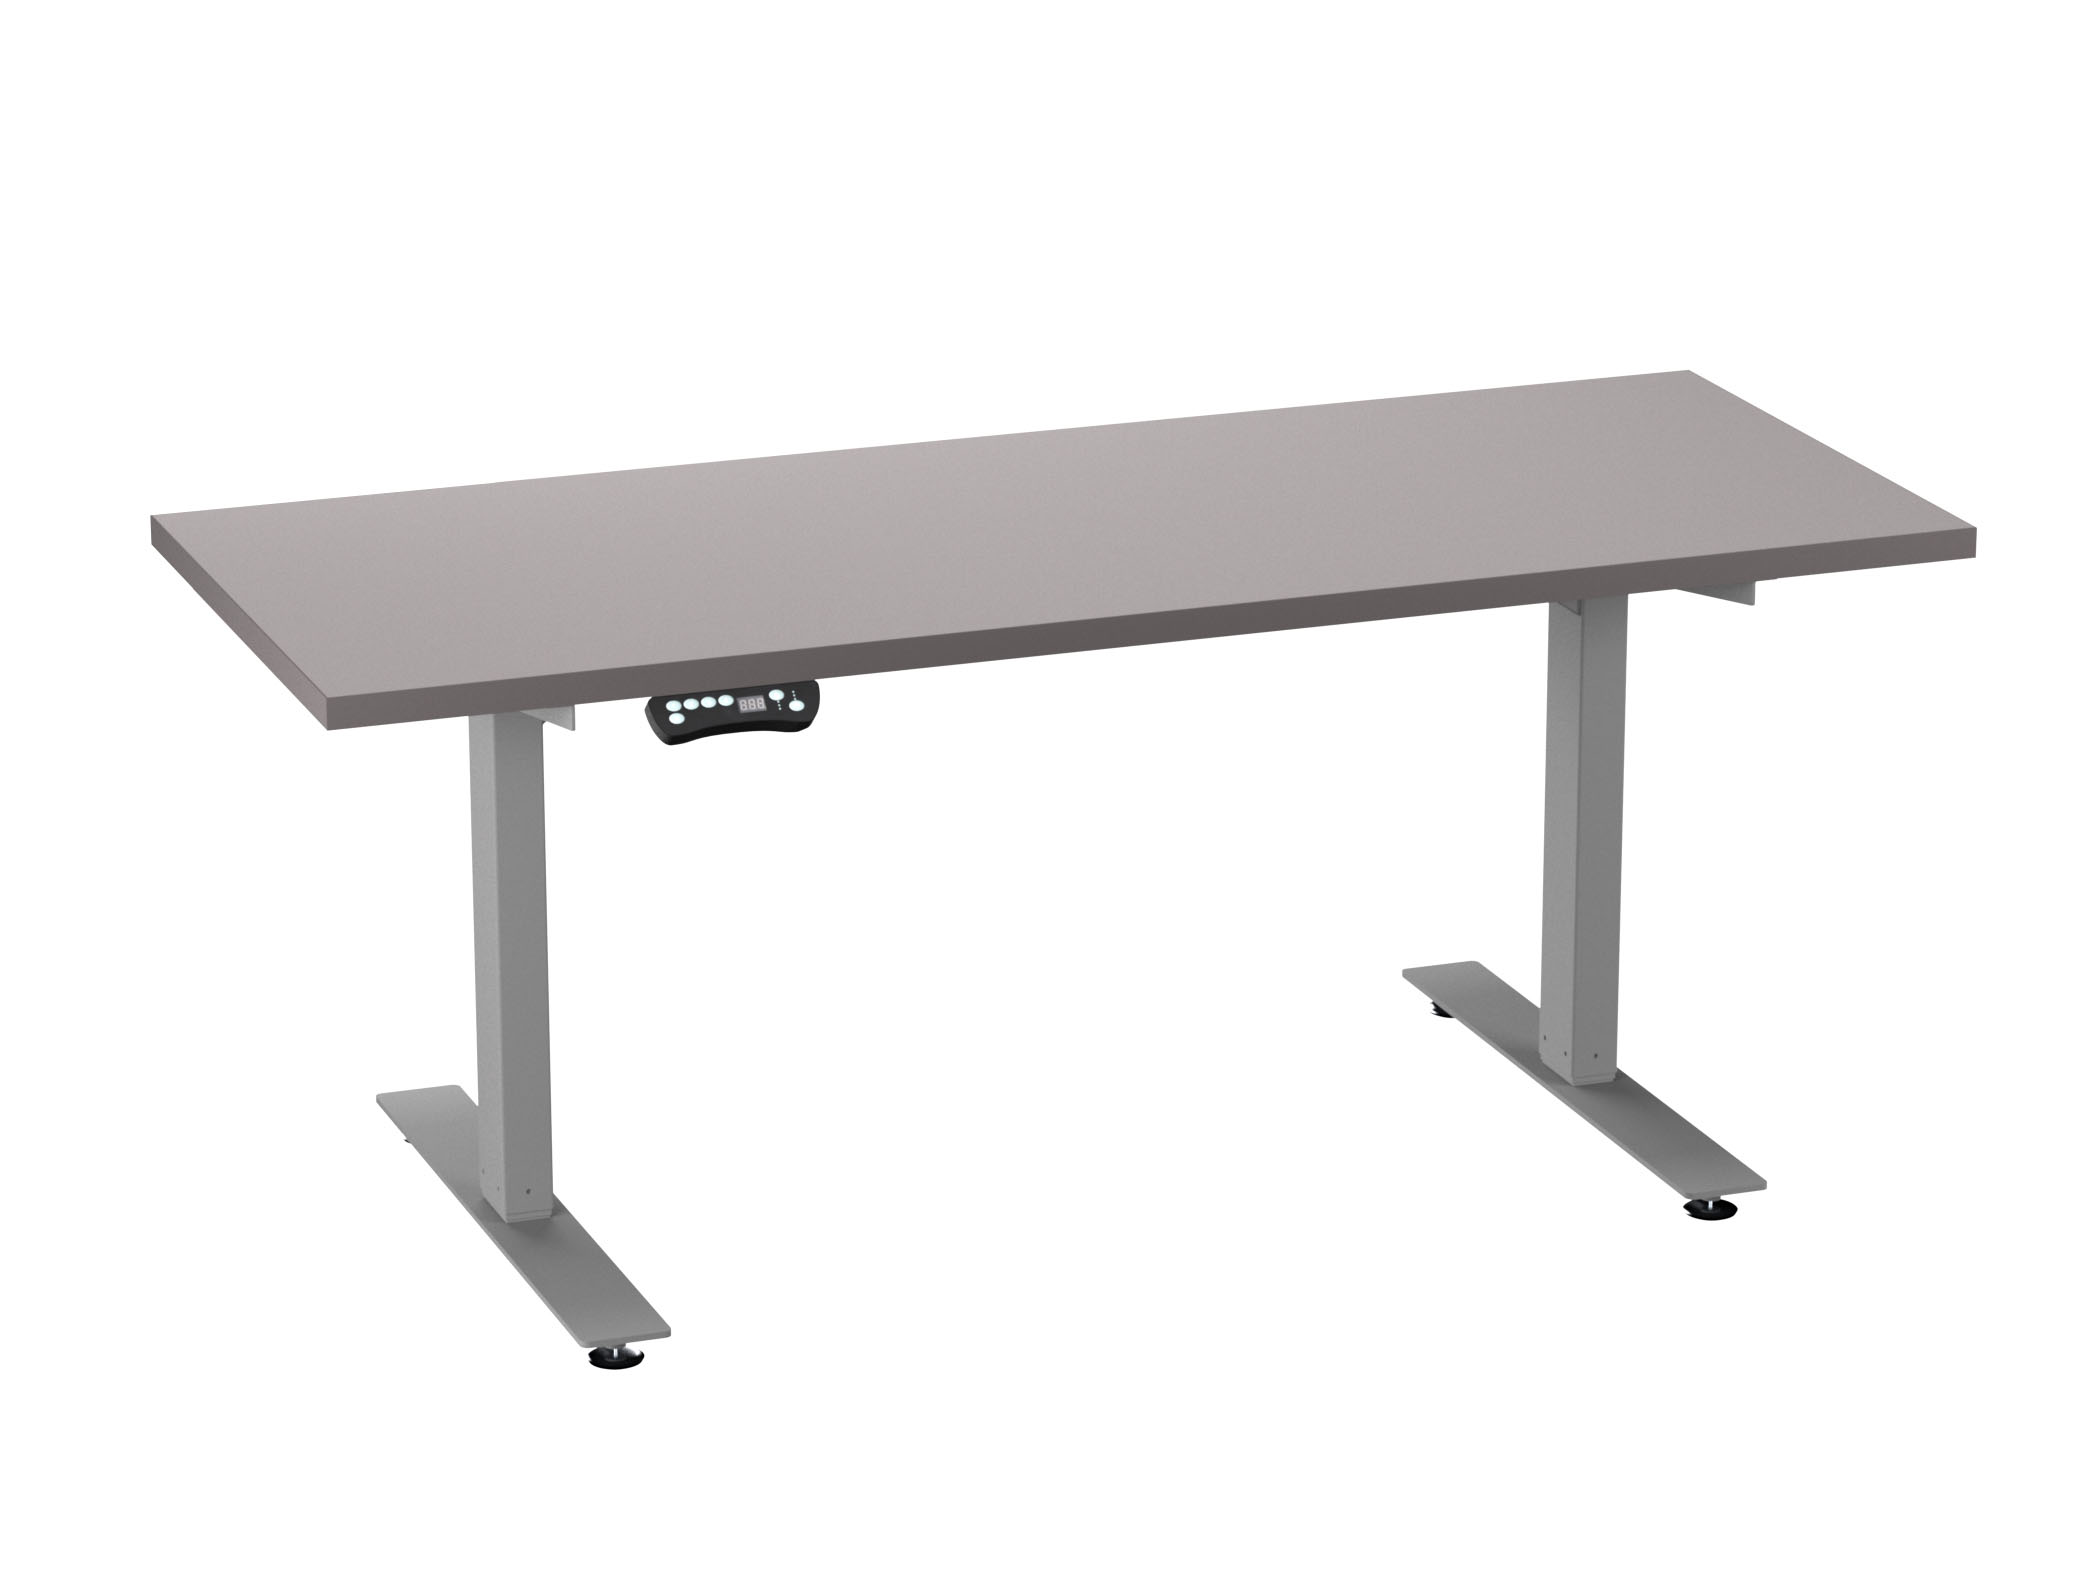 Executive Furniture from Compel - HiLo adjustable table